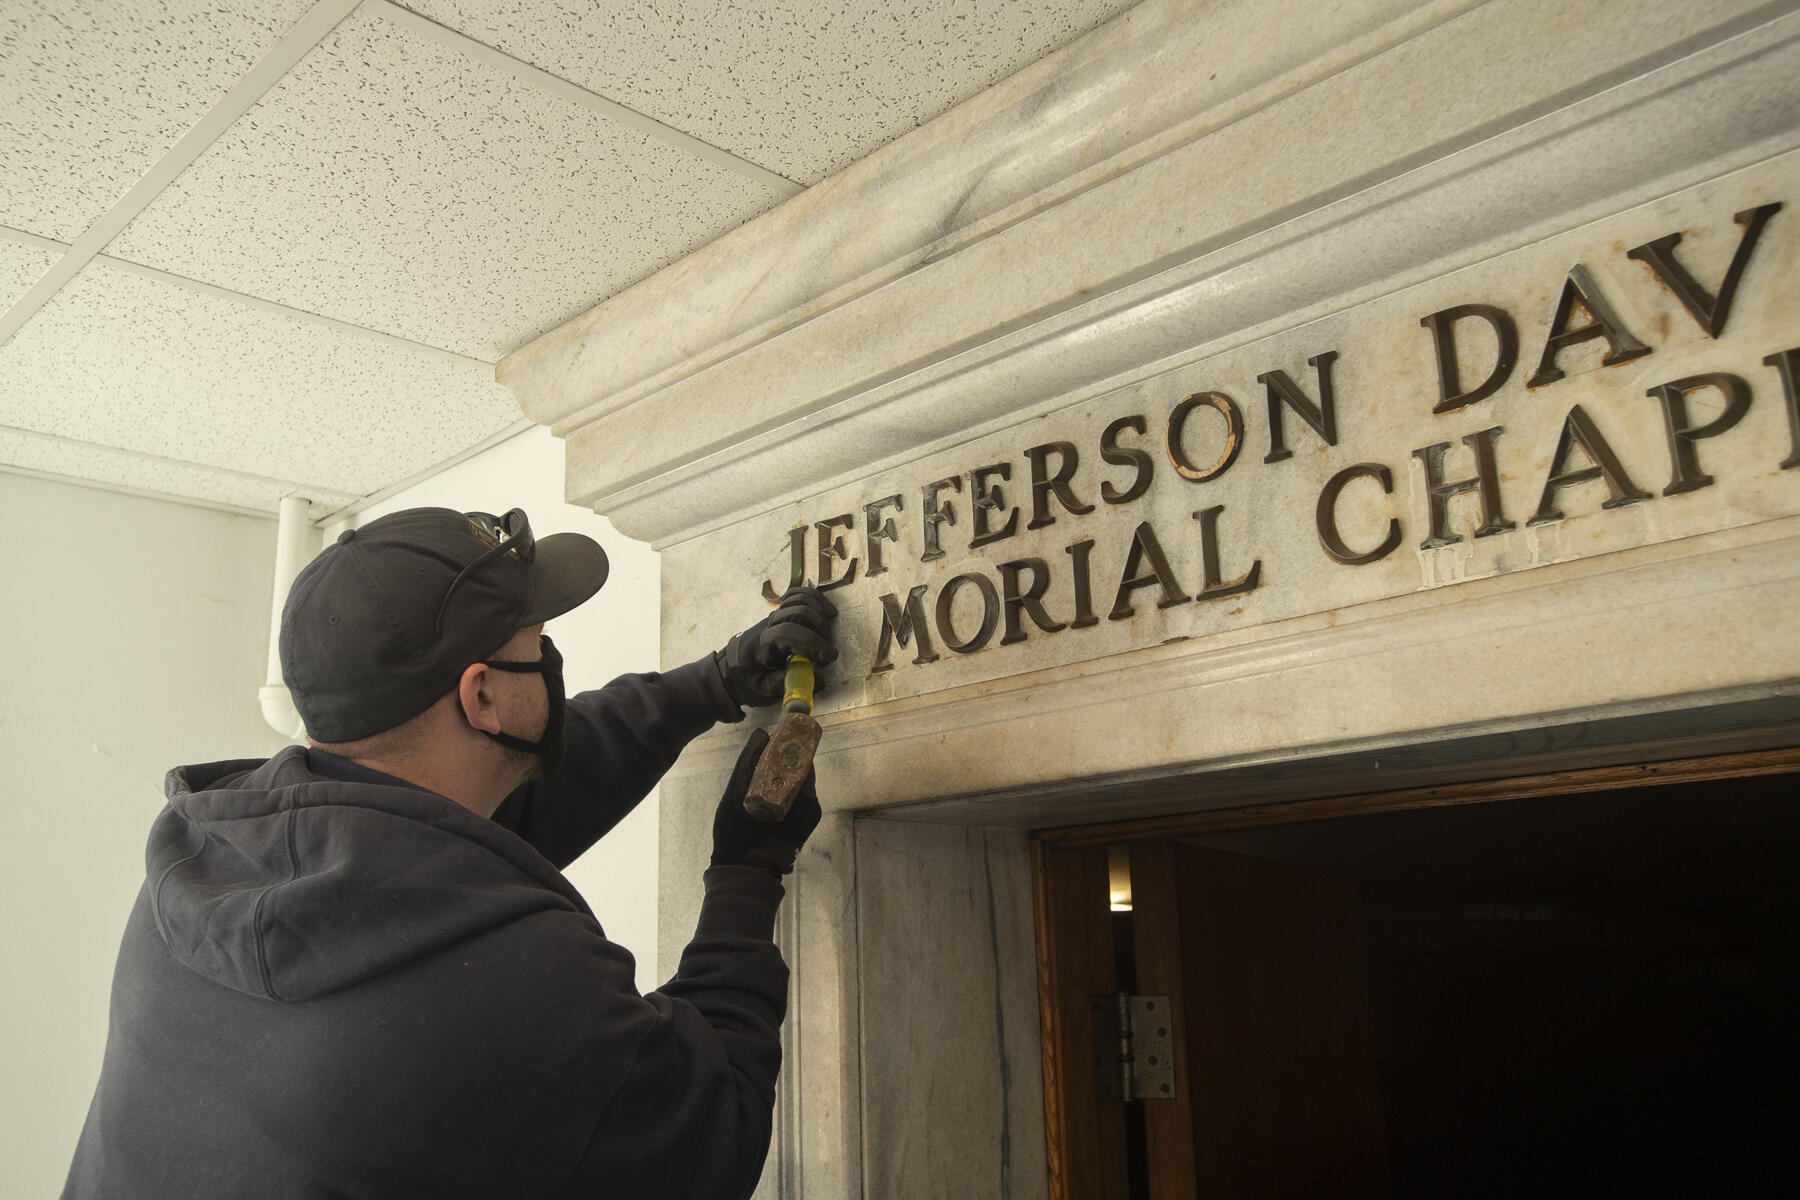 Letters are removed at the Jefferson Davis Memorial Chapel in VCU's West Hospital in December 2020.